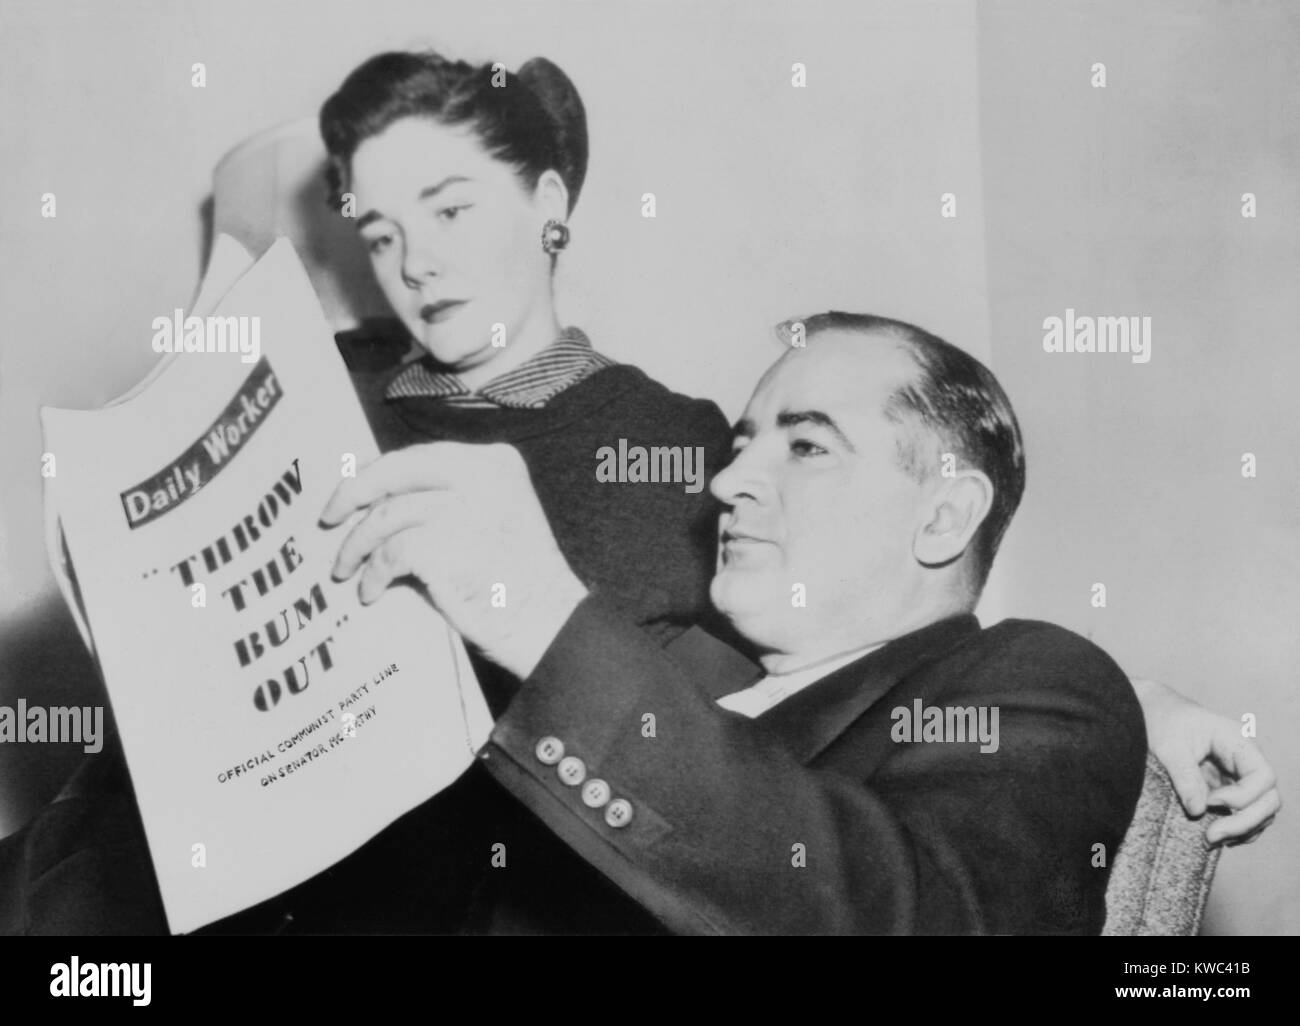 Sen. and Mrs. Joseph R. McCarthy at home as the Senate prepared to his censure. Nov. 8, 1954. They are reviewing Photostats of the Communist 'Daily Worker' urging the U.S. Senate to 'Throw the bum out.' (BSLOC 2015 14 27) Stock Photo